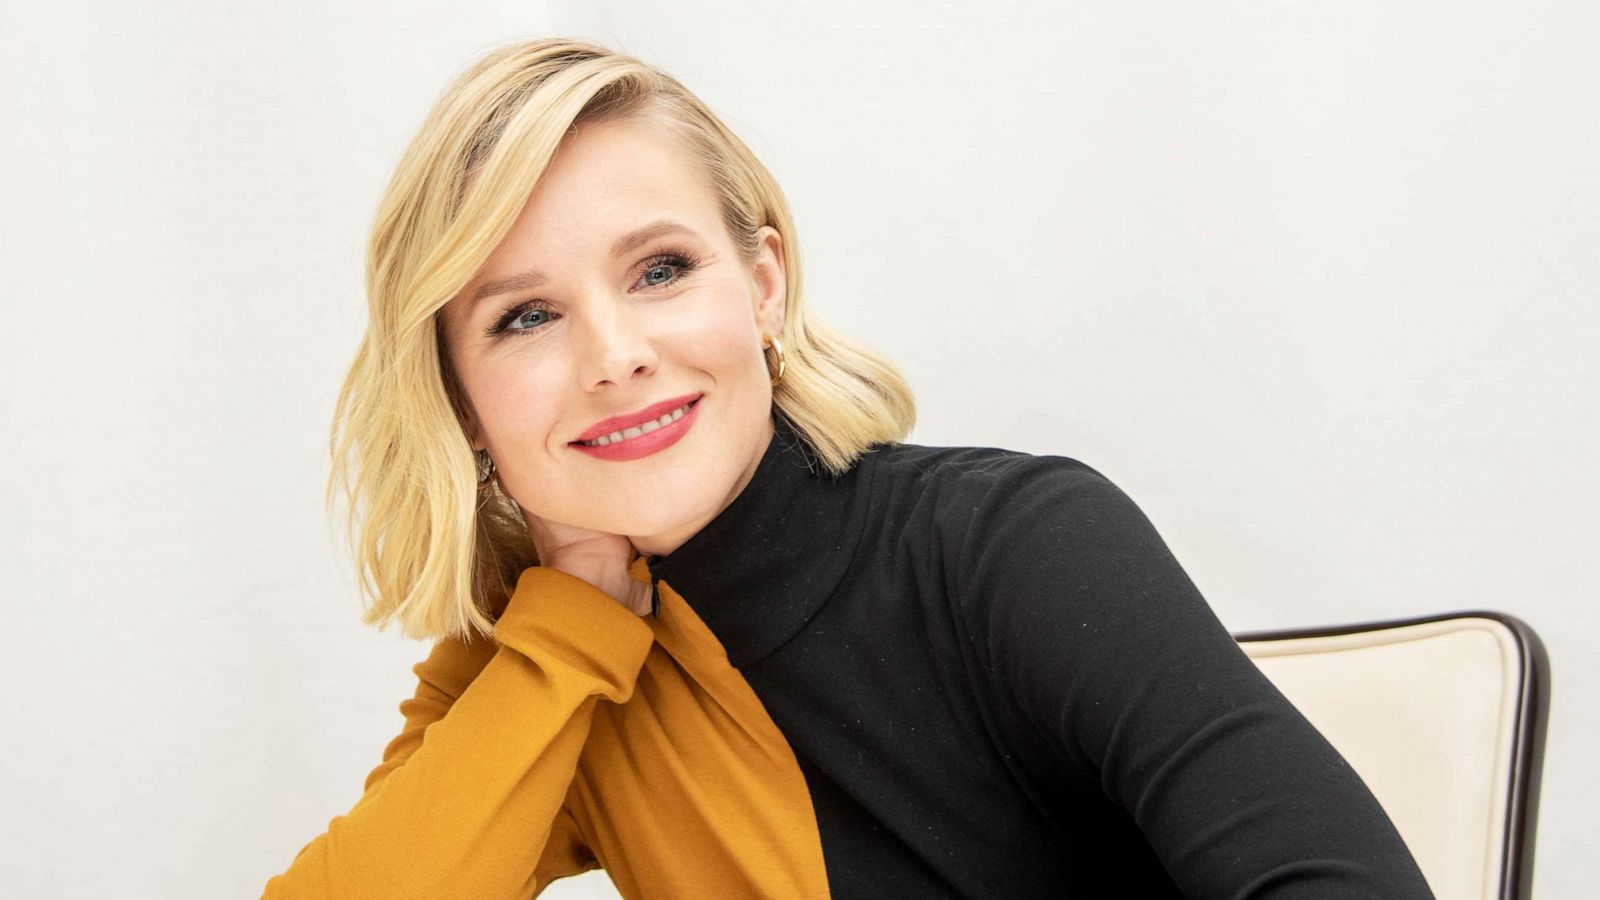 PHOTO: Kristen Bell speaks during a press conference in Beverly Hills, Calif., Oct. 16, 2019.